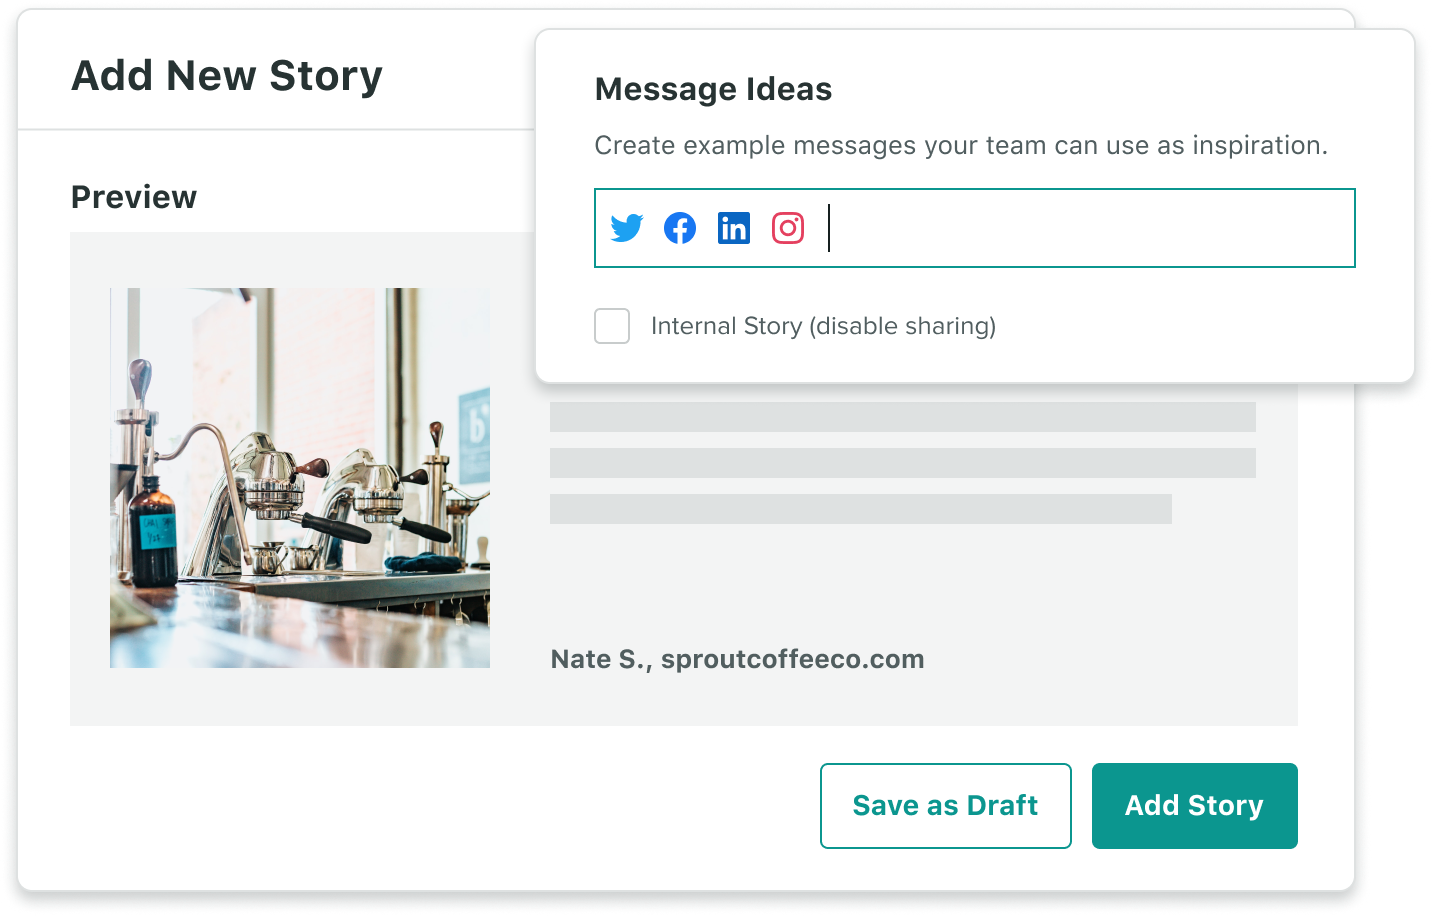 Employee advocacy tool enables message suggestions